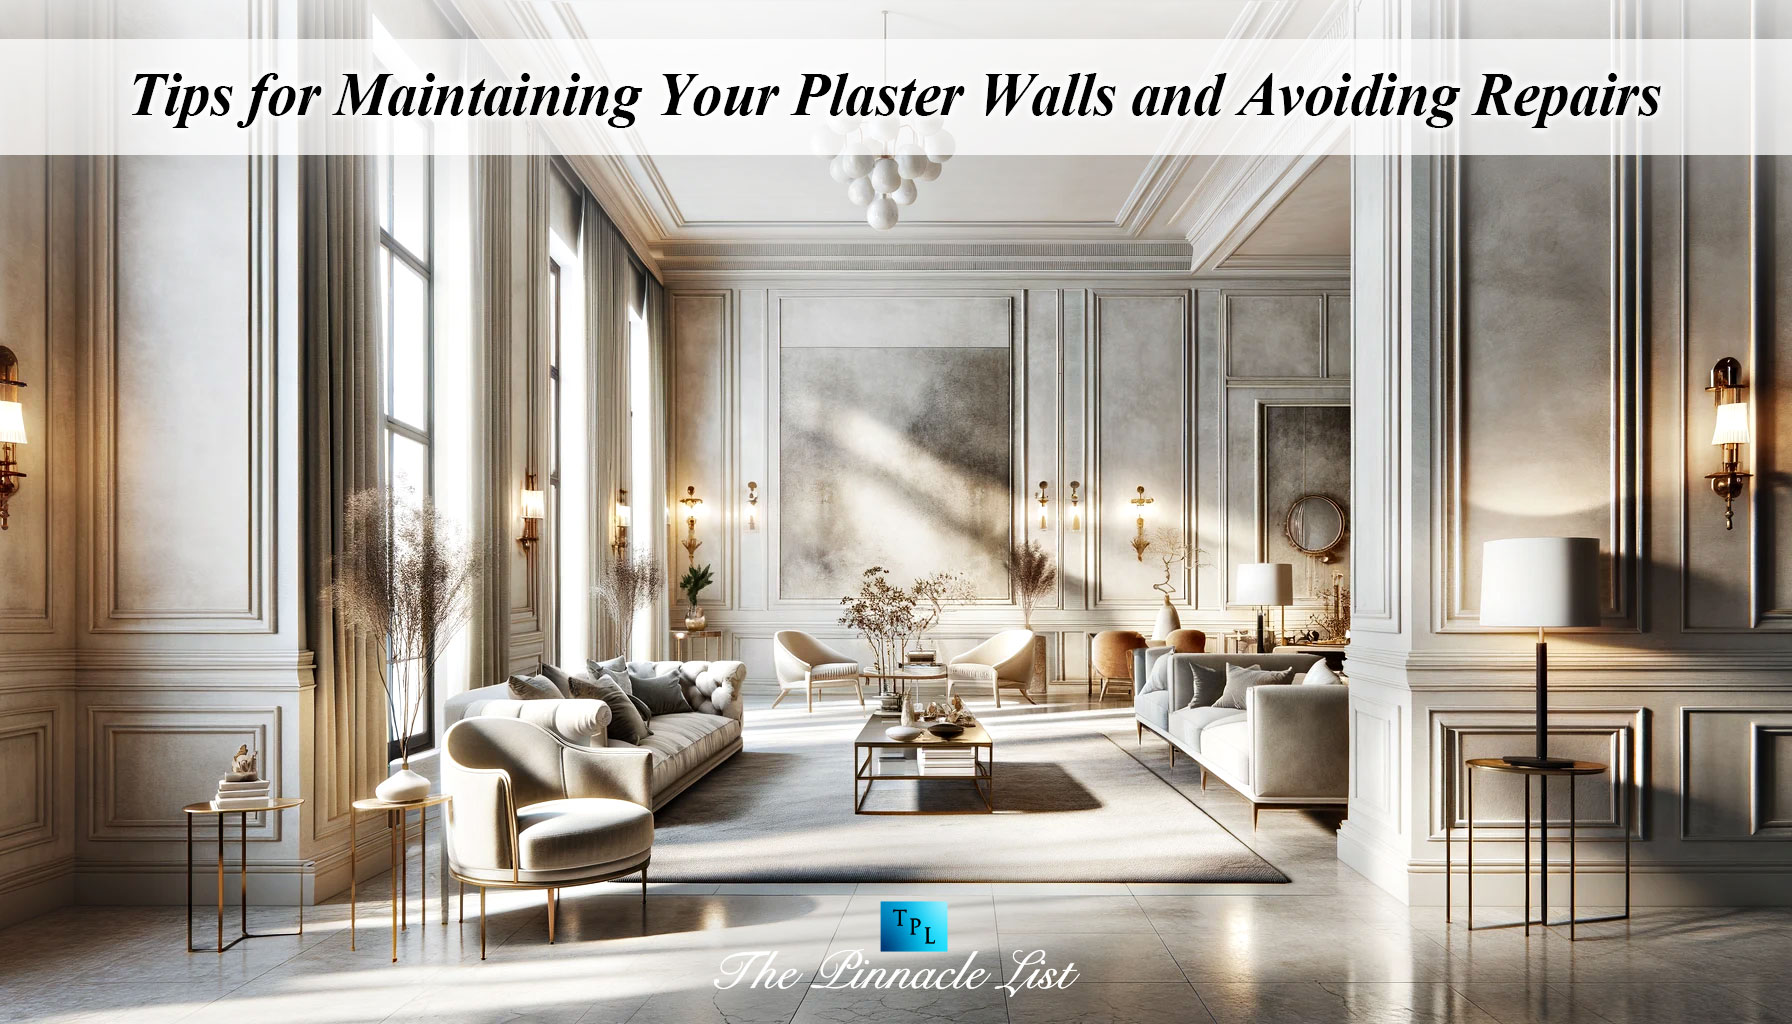 Tips for Maintaining Your Plaster Walls and Avoiding Repairs